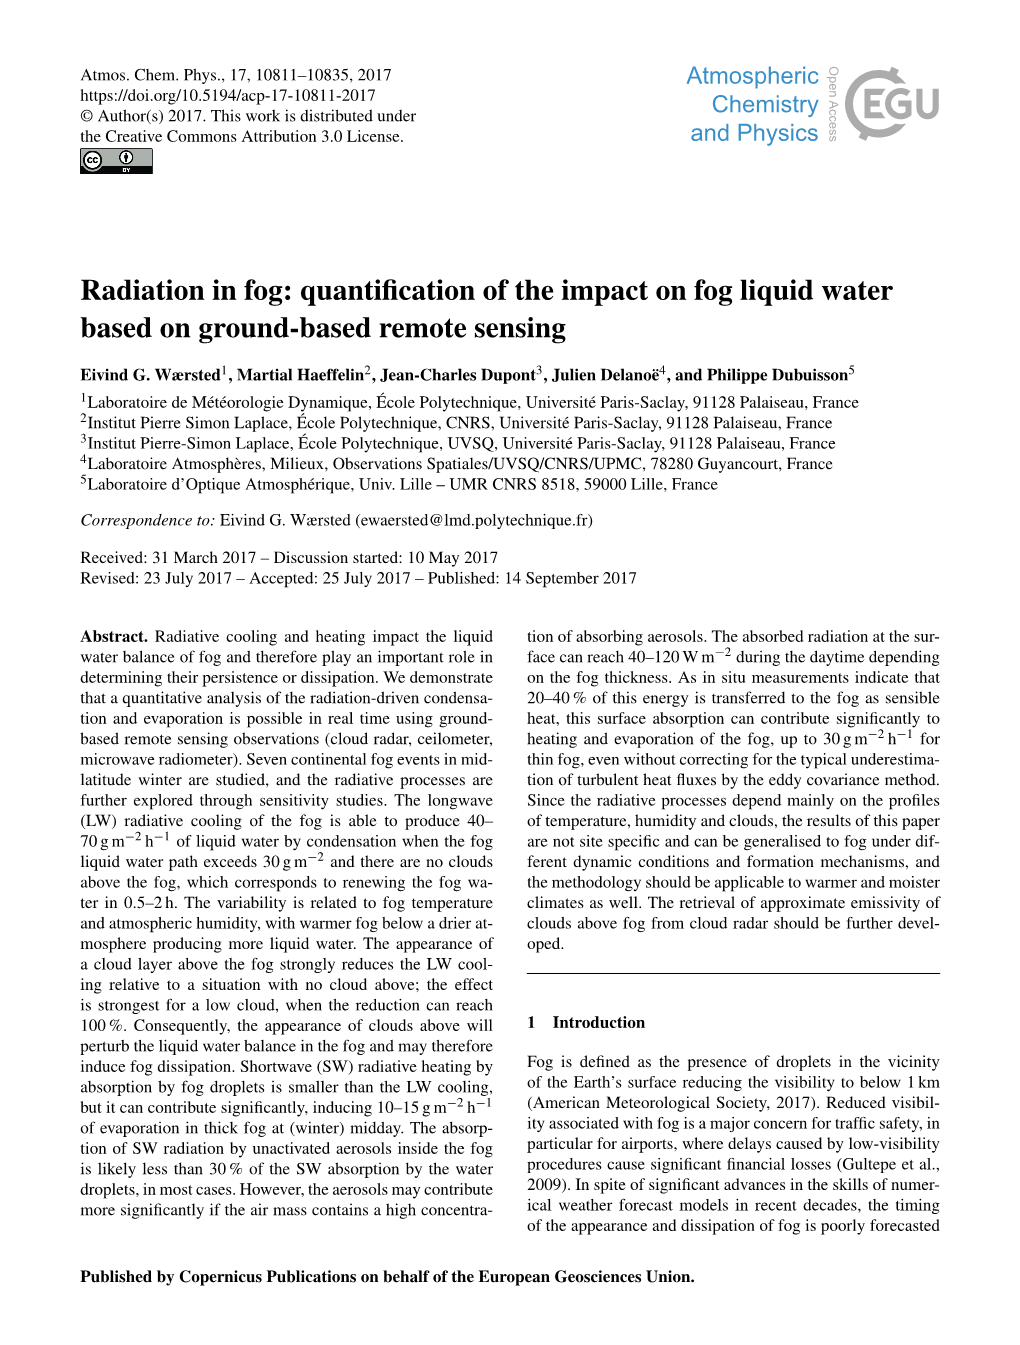 Radiation in Fog: Quantification of the Impact on Fog Liquid Water Based on Ground-Based Remote Sensing